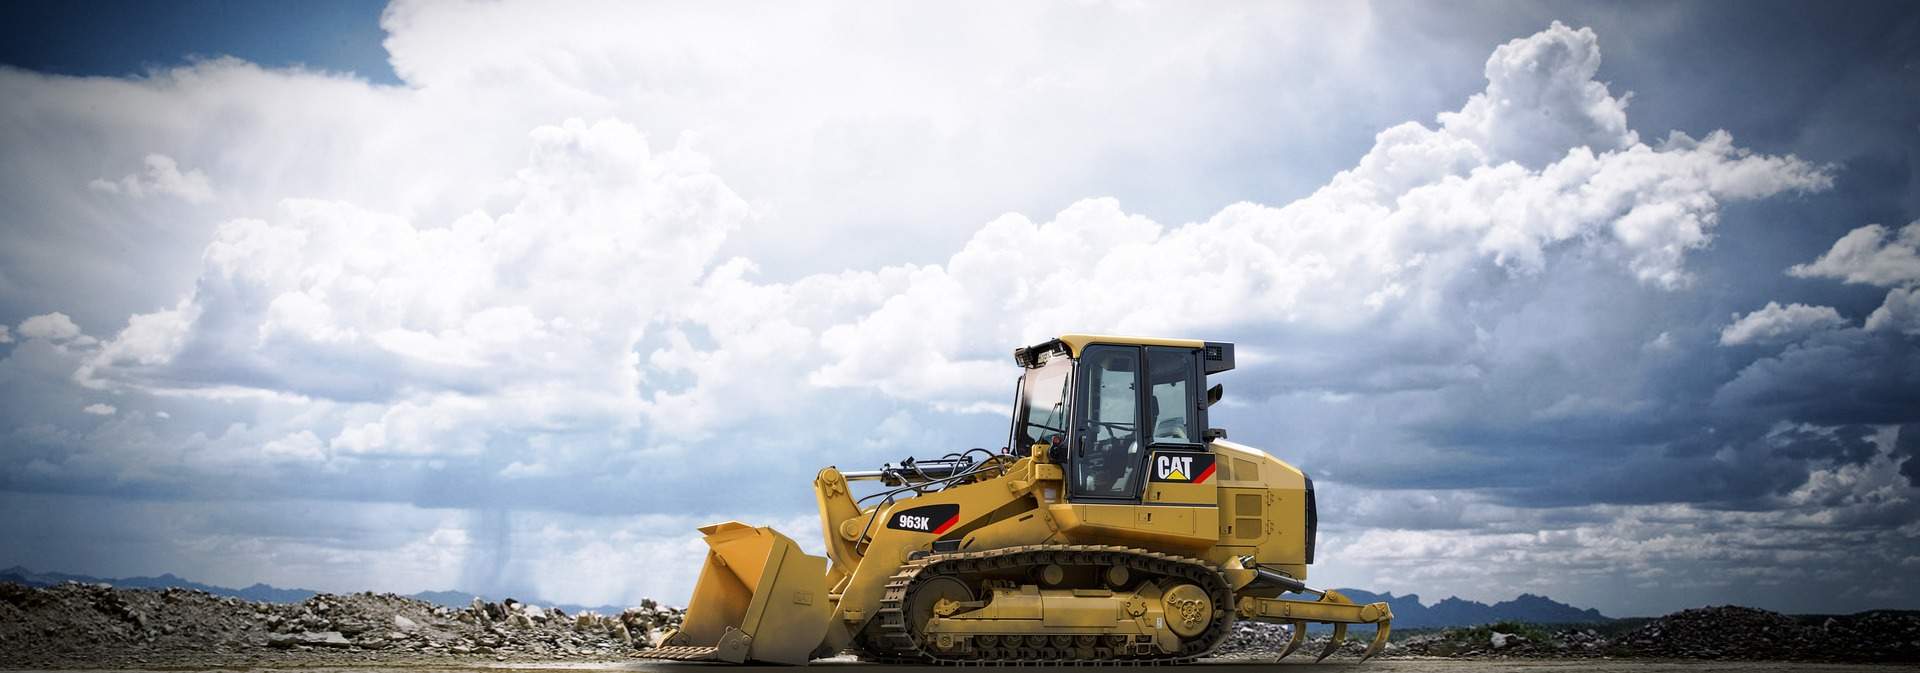 Caterpillar Financial grows revenues and retail volumes